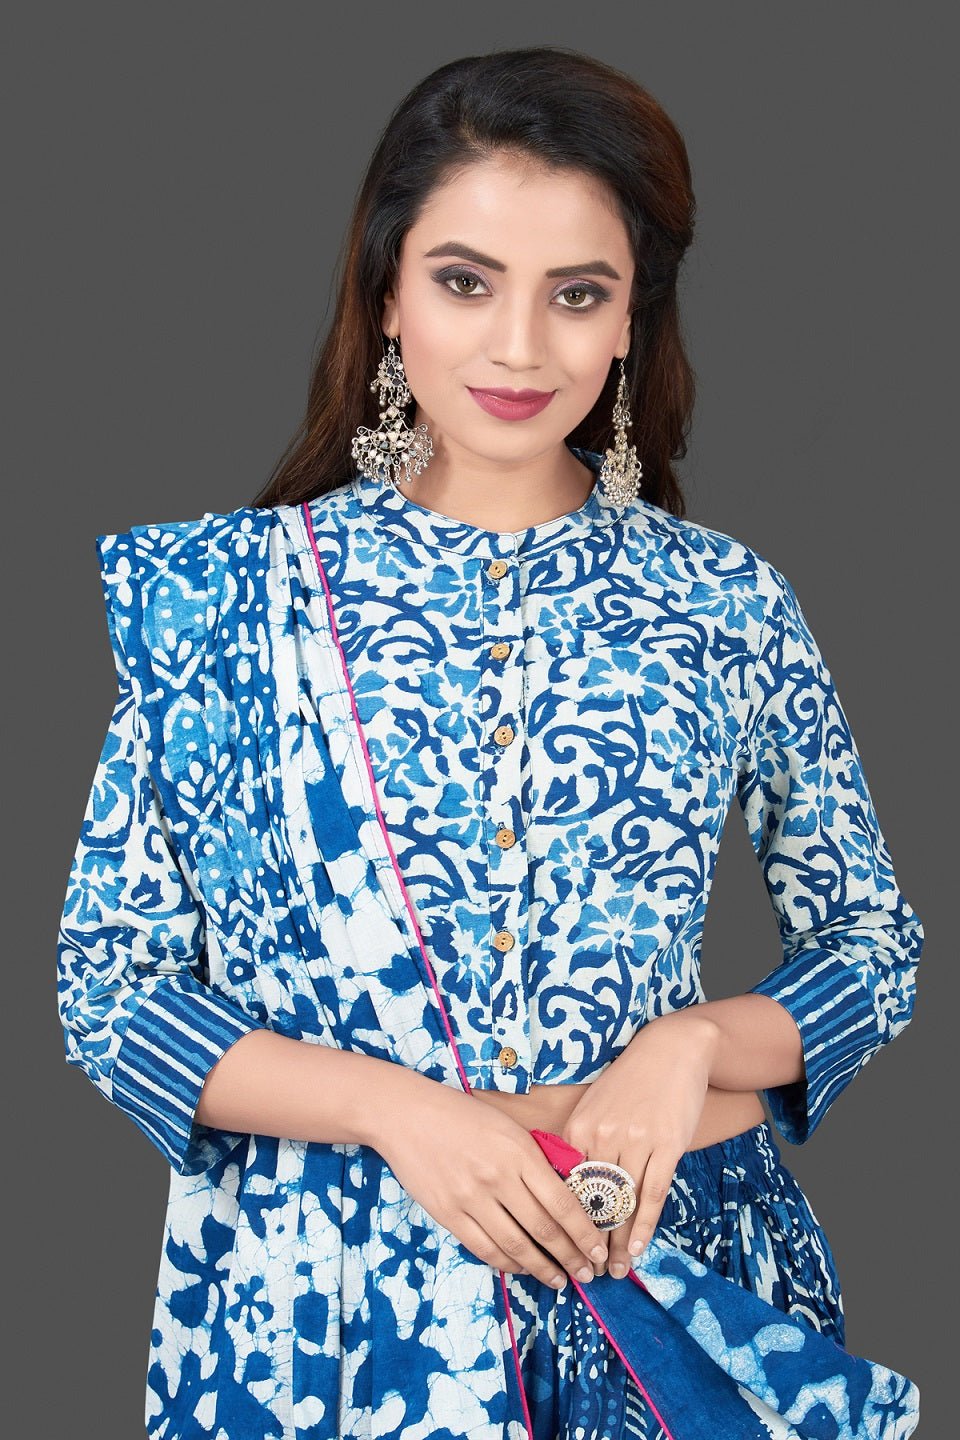 Buy beautiful blue and white Bagru block print skirt set with dupatta. Shop designer Indian clothing, wedding lehengas, designer Anarkali, gharara suits, Indian dresses in USA from Pure Elegance Indian fashions store for parties and special occasions.-closeup